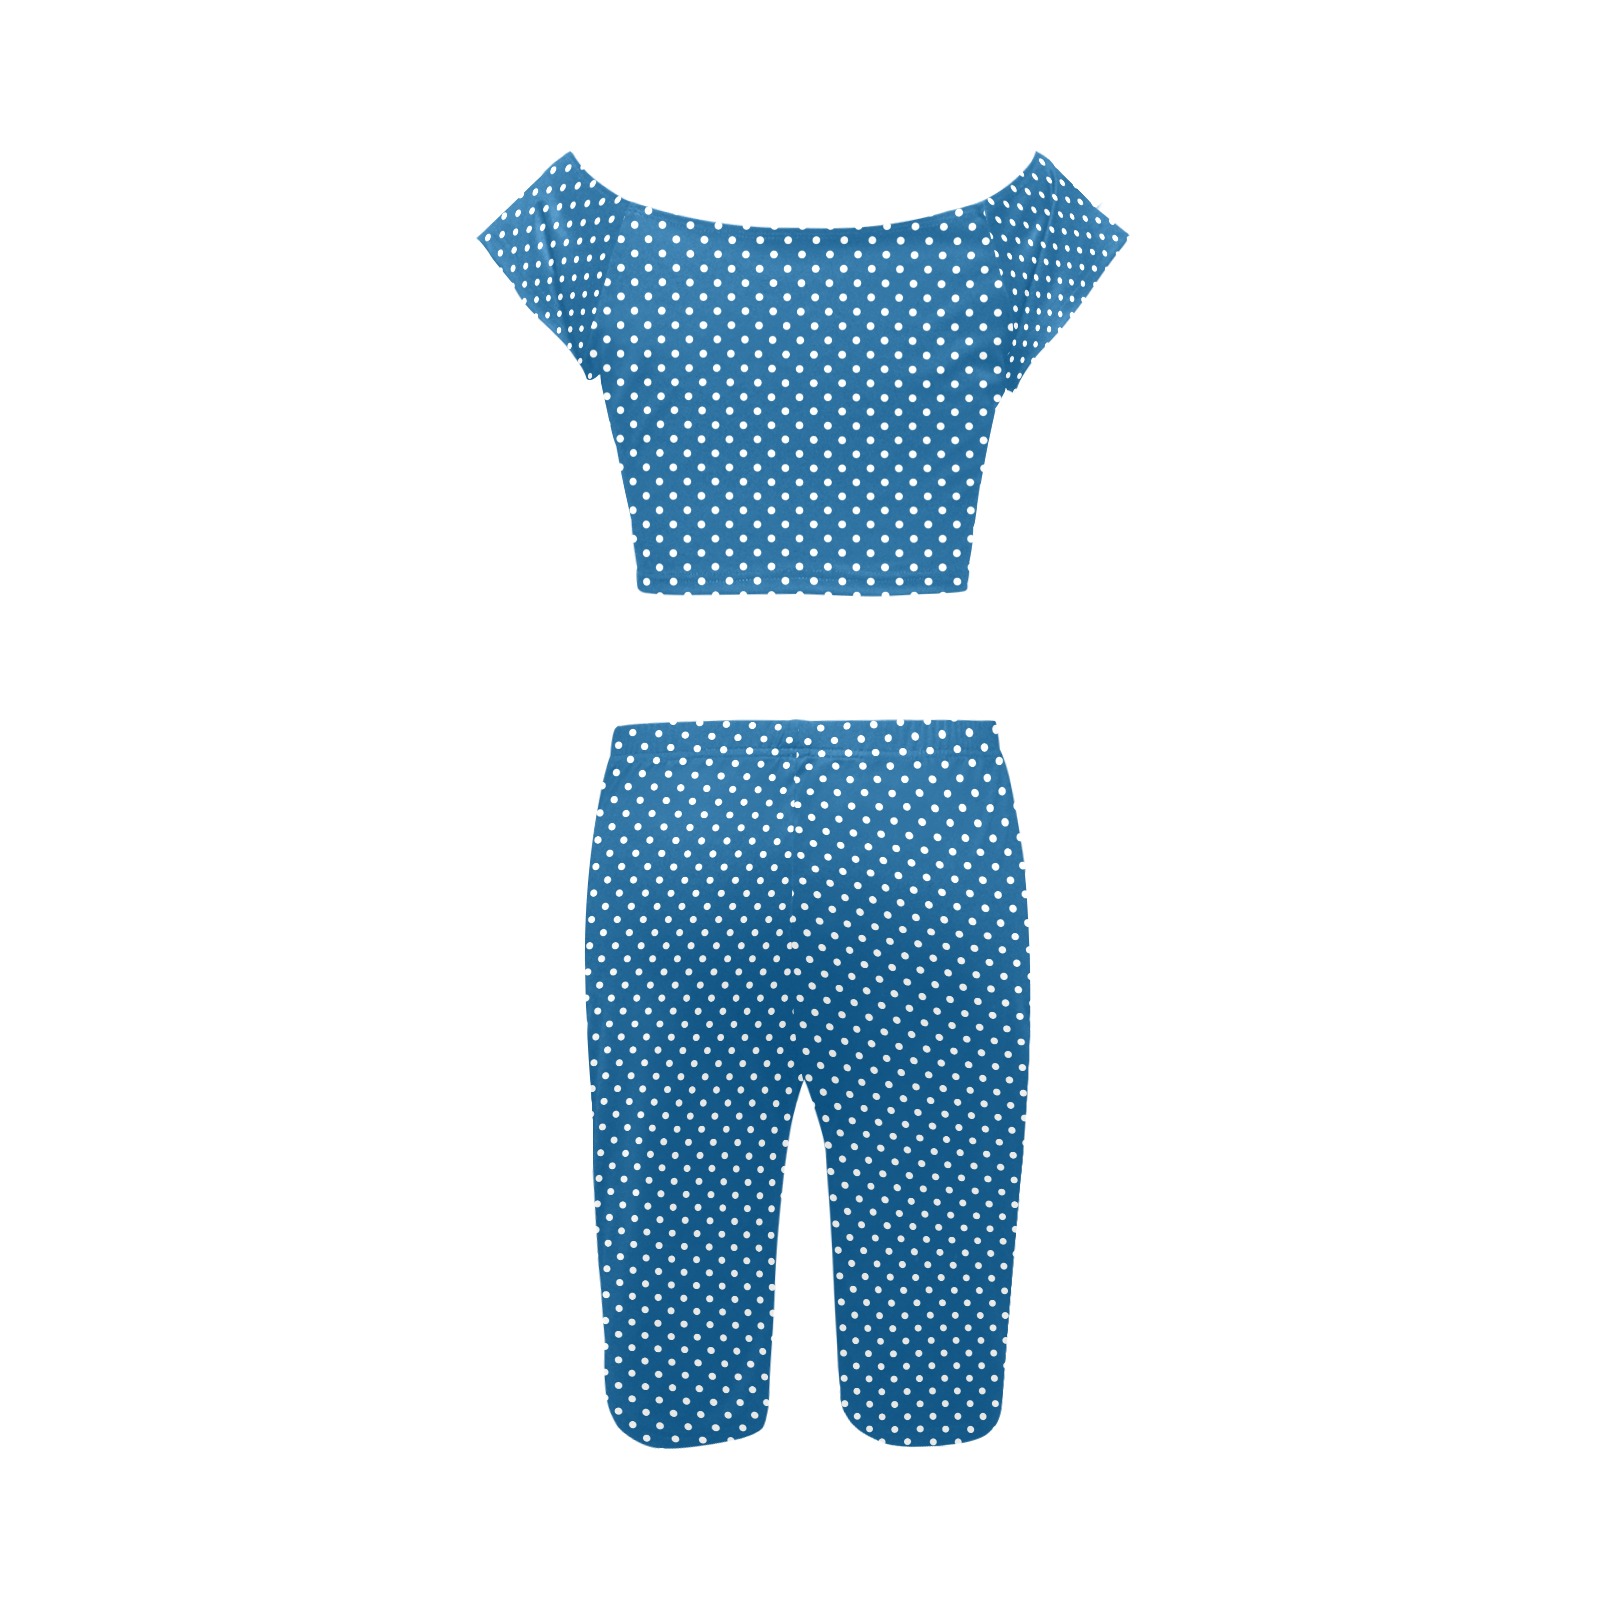 Classic Blue and White Polka Dots Women's Crop Top Yoga Set